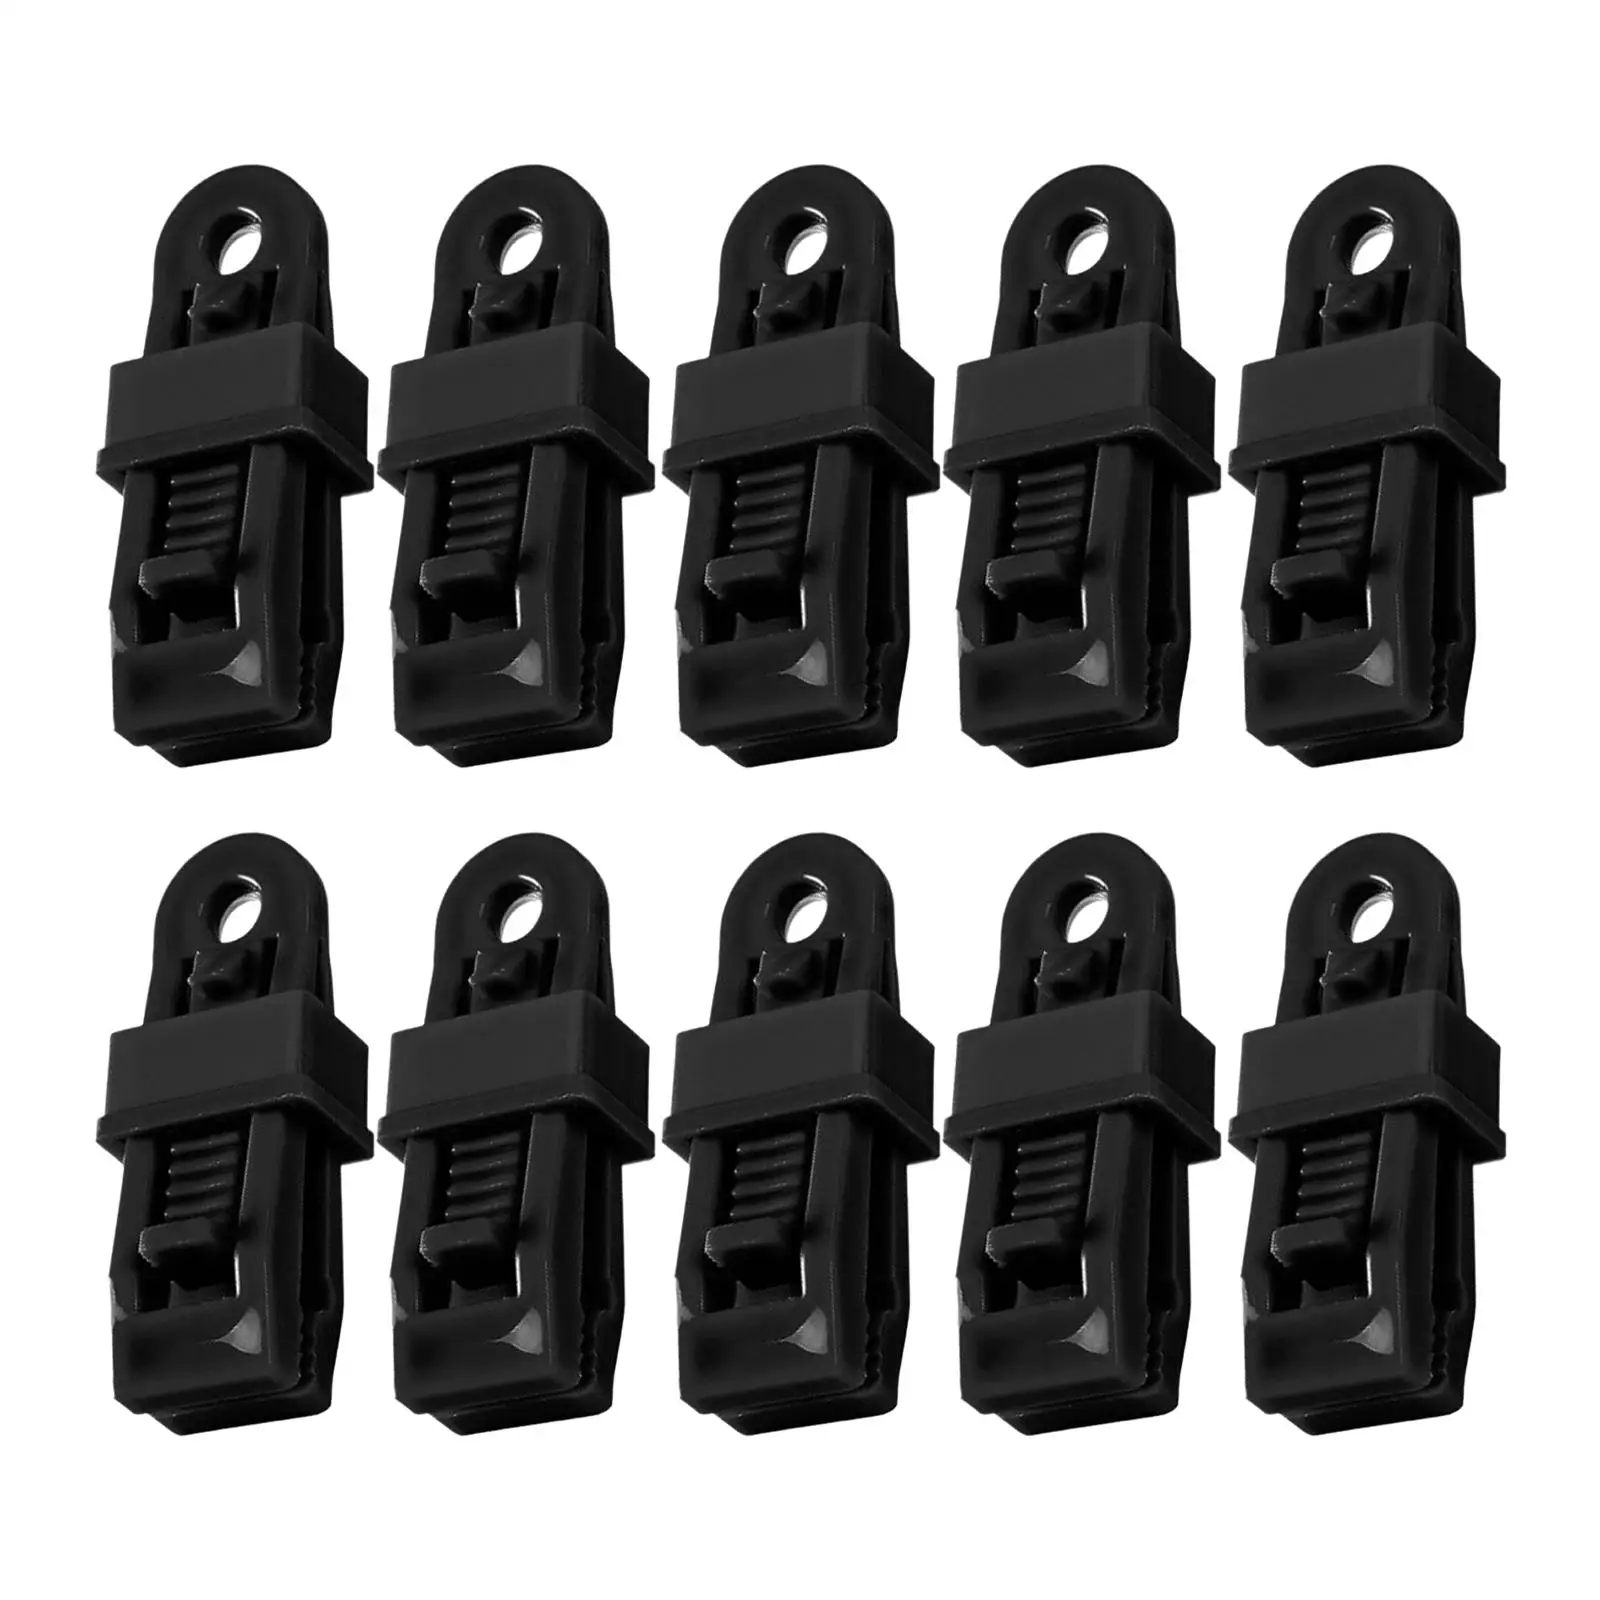 10 Count Crocodile Tent Awning Clamps for Camping Easy Store and Carry Black Heavy Duty Outdoor Easy Install Non Slip Durable